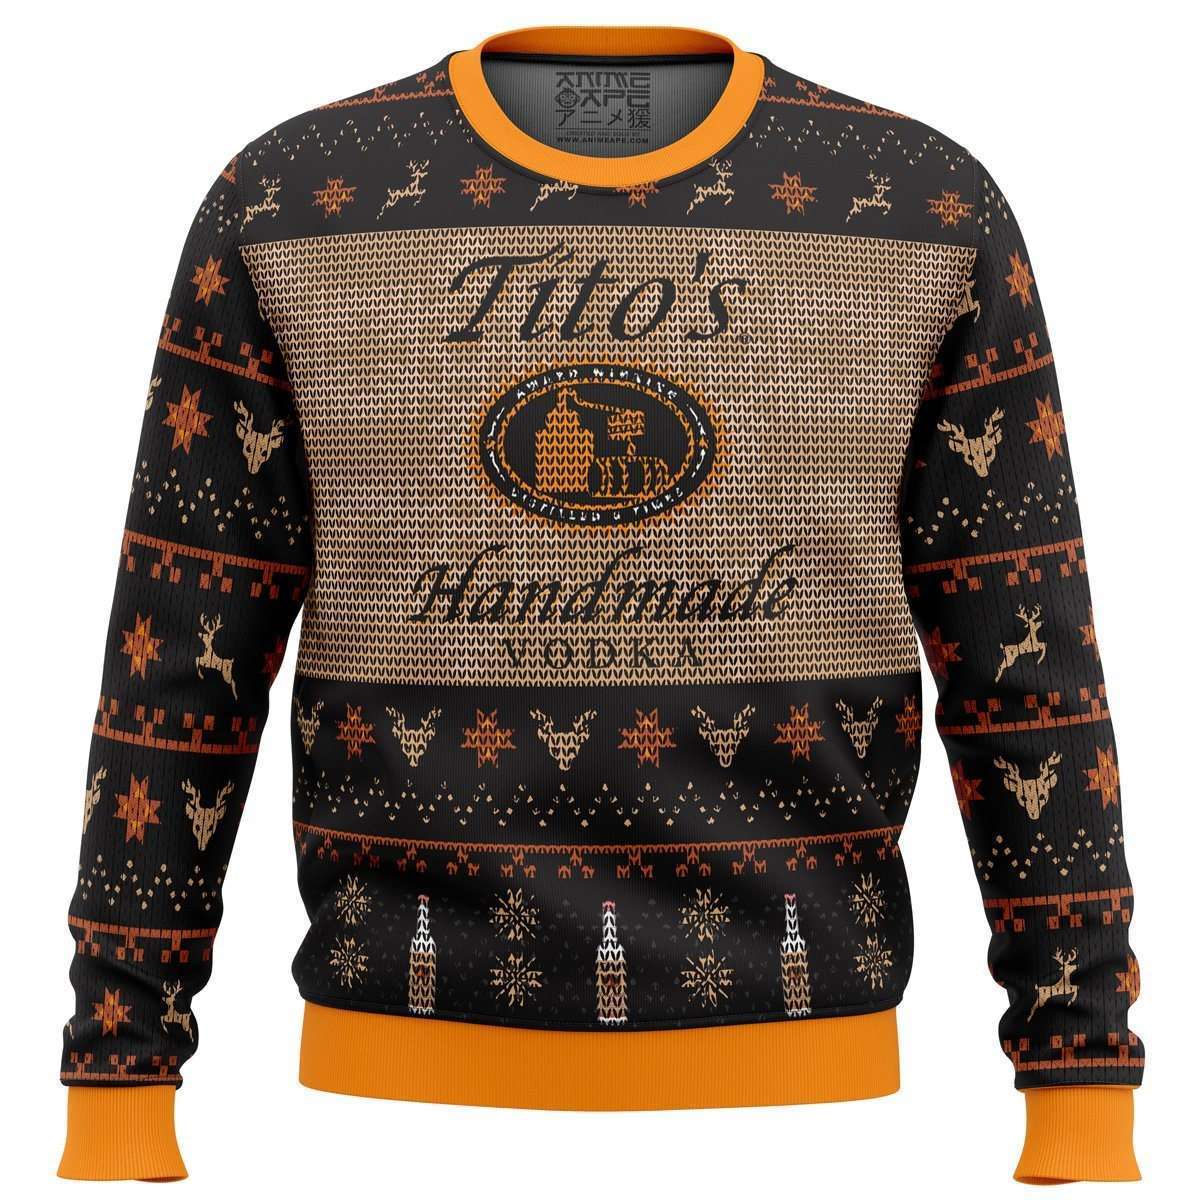 Tito's Vodka Ugly Christmas Sweater